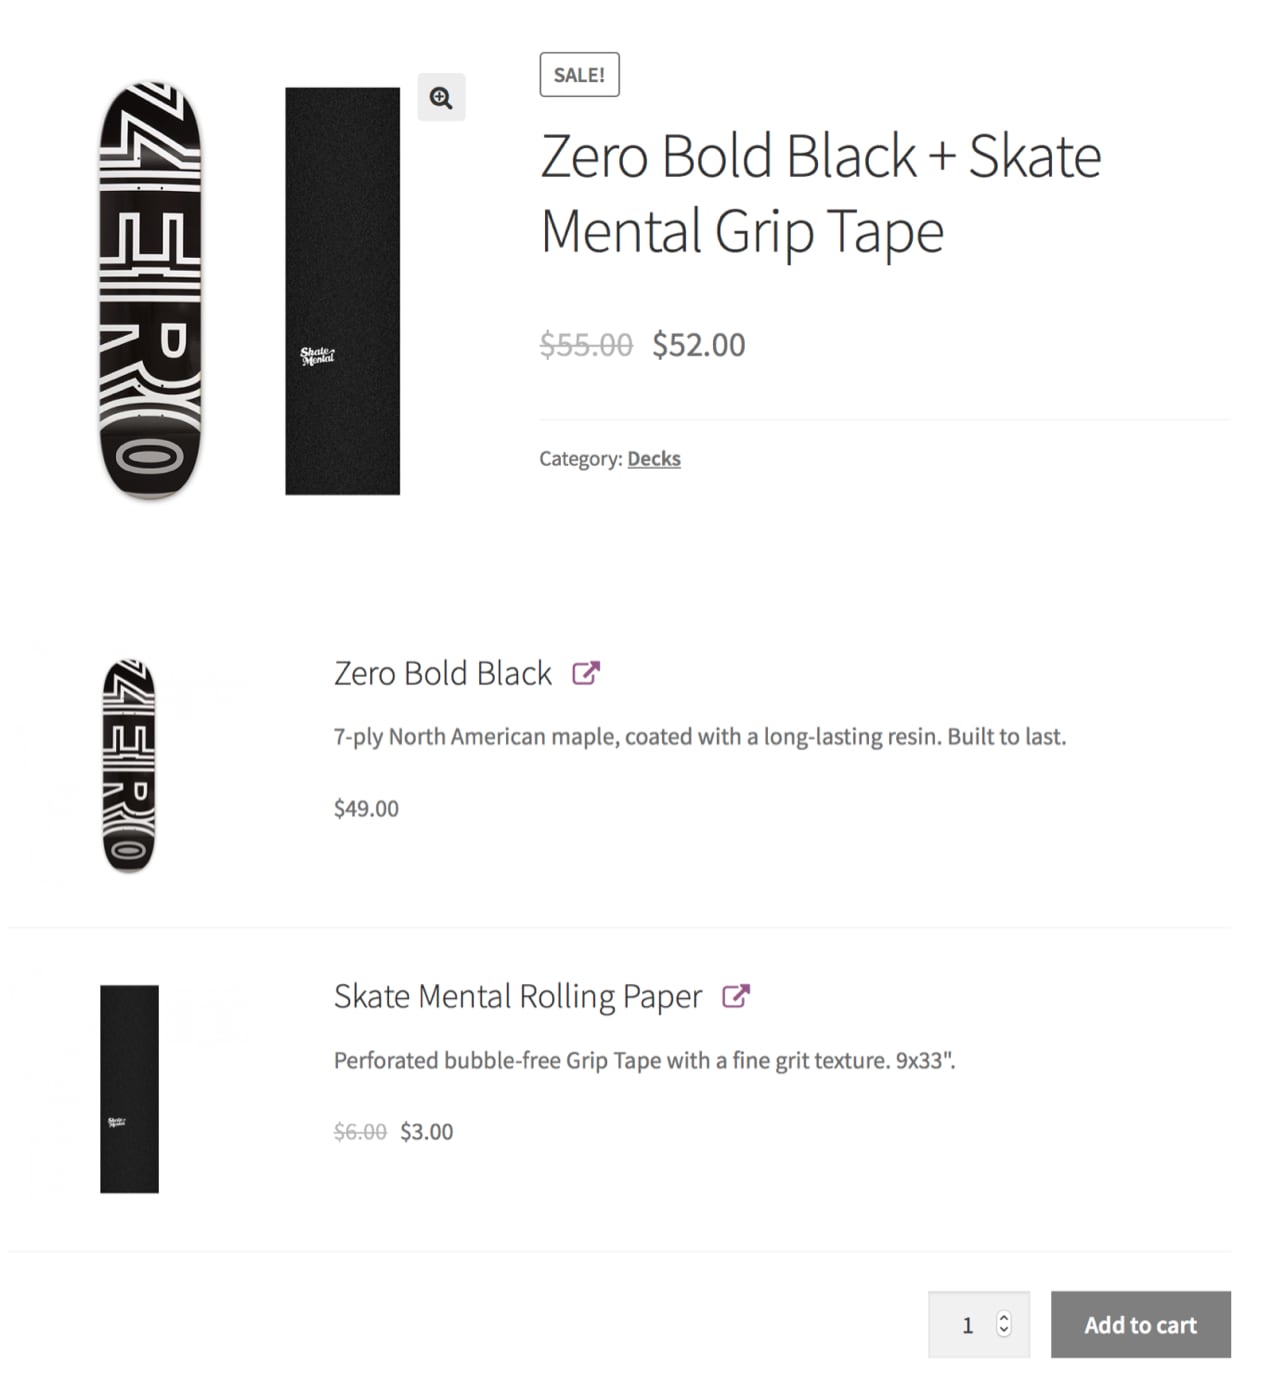 product bundle showing a skate board and accessories